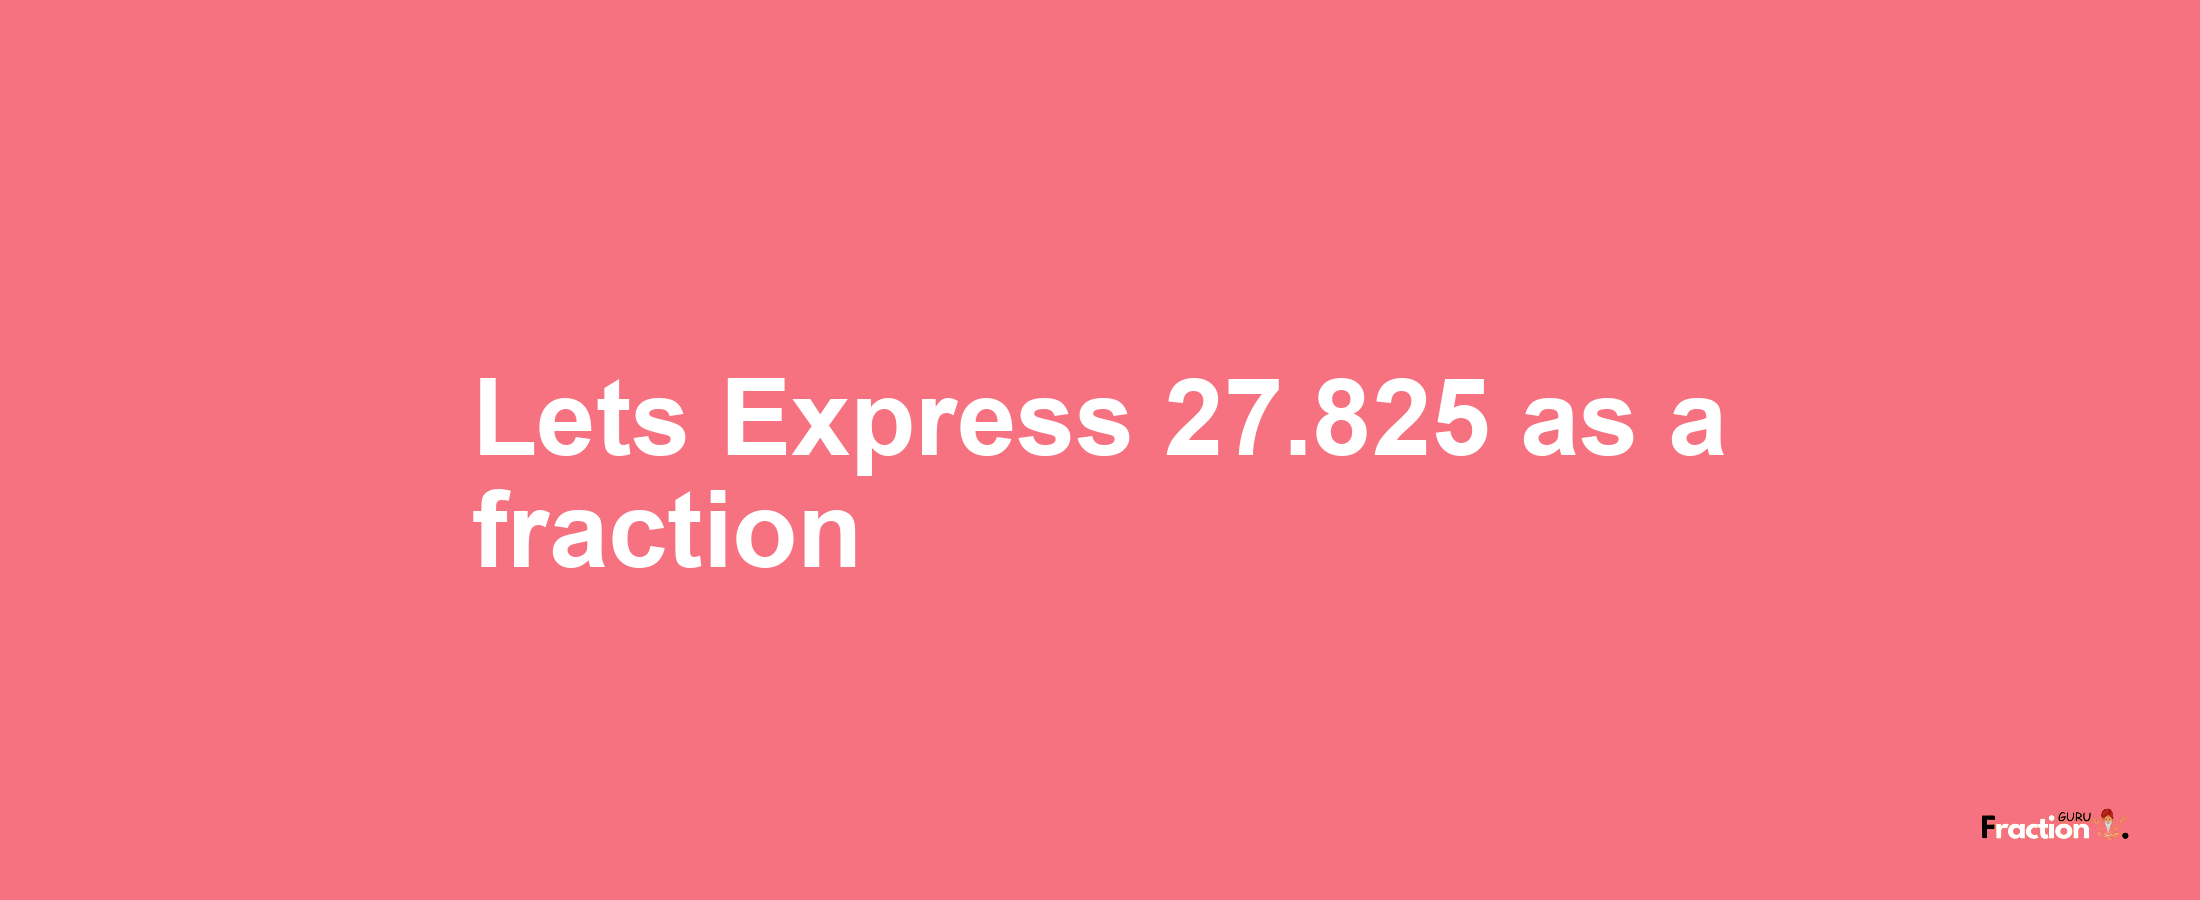 Lets Express 27.825 as afraction